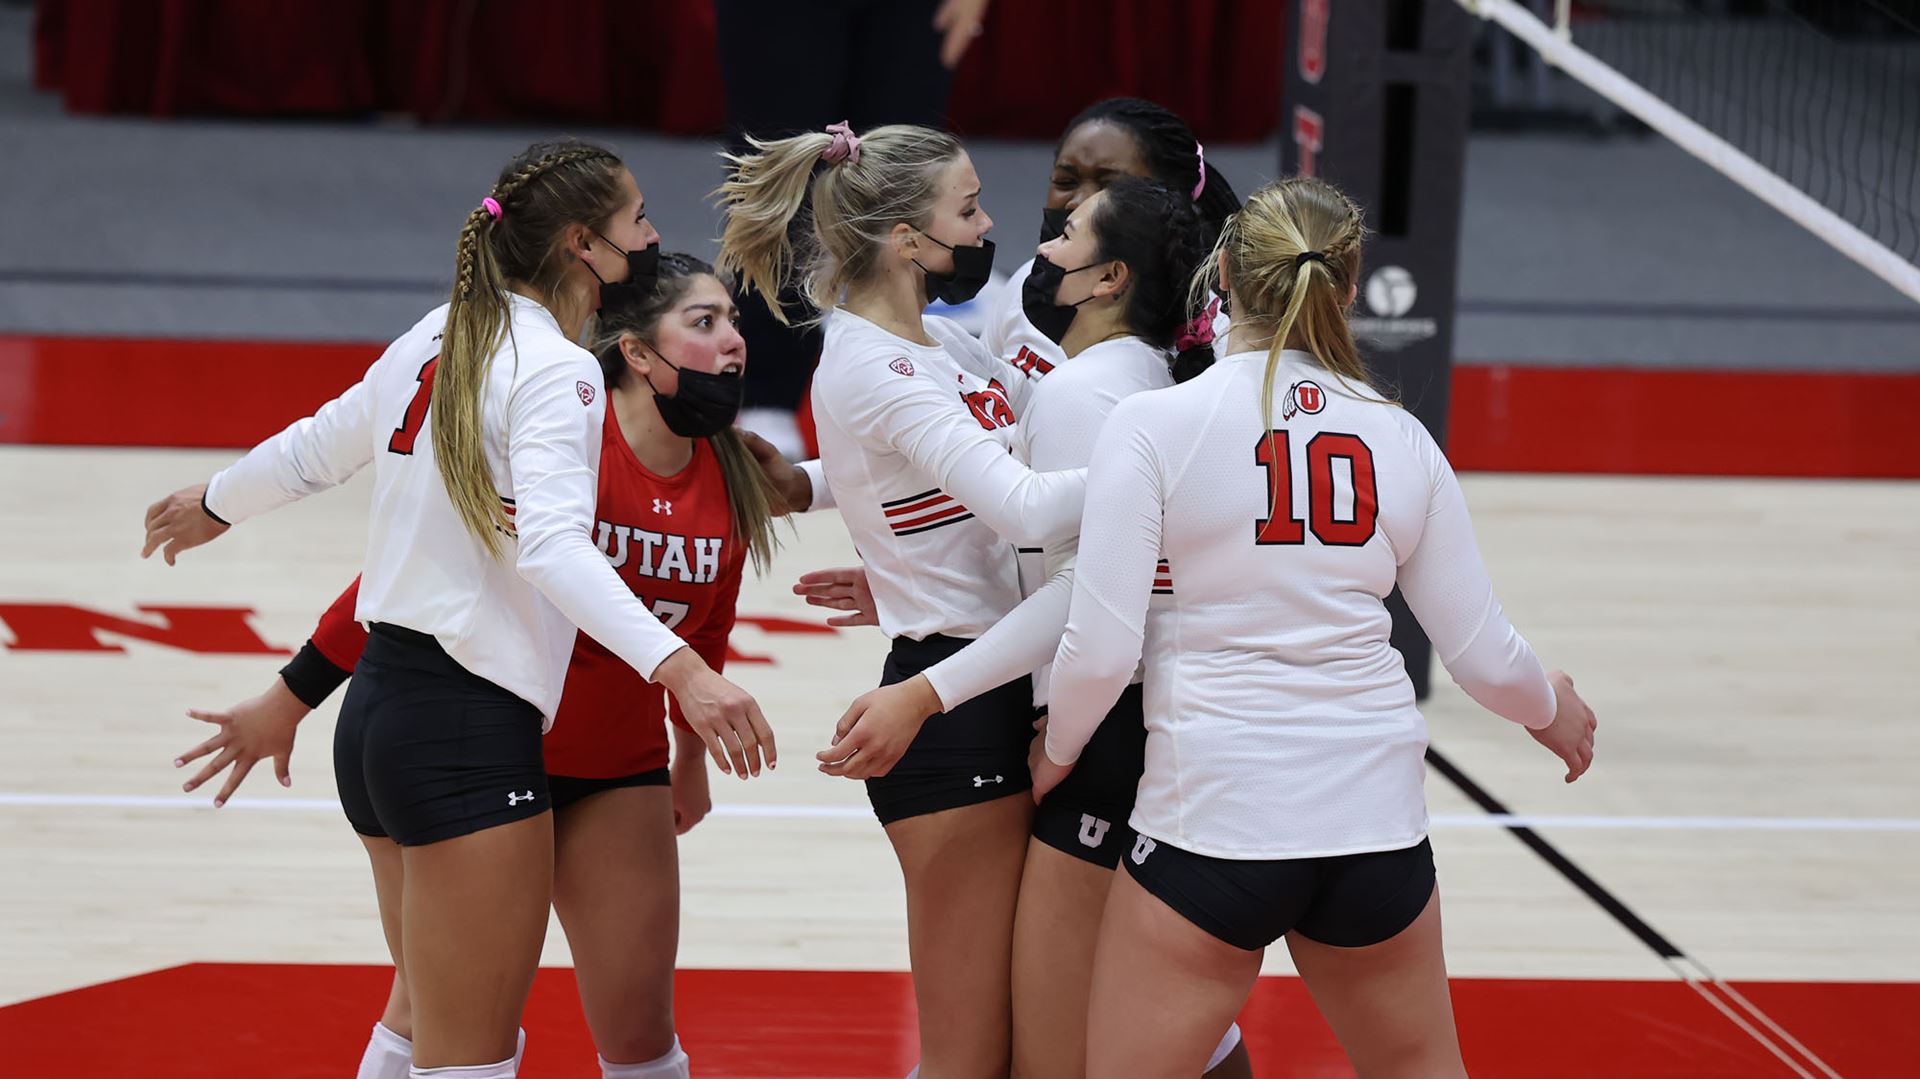 Competition Continues To Ramp Up For Utah Volleyball With Oregon Up